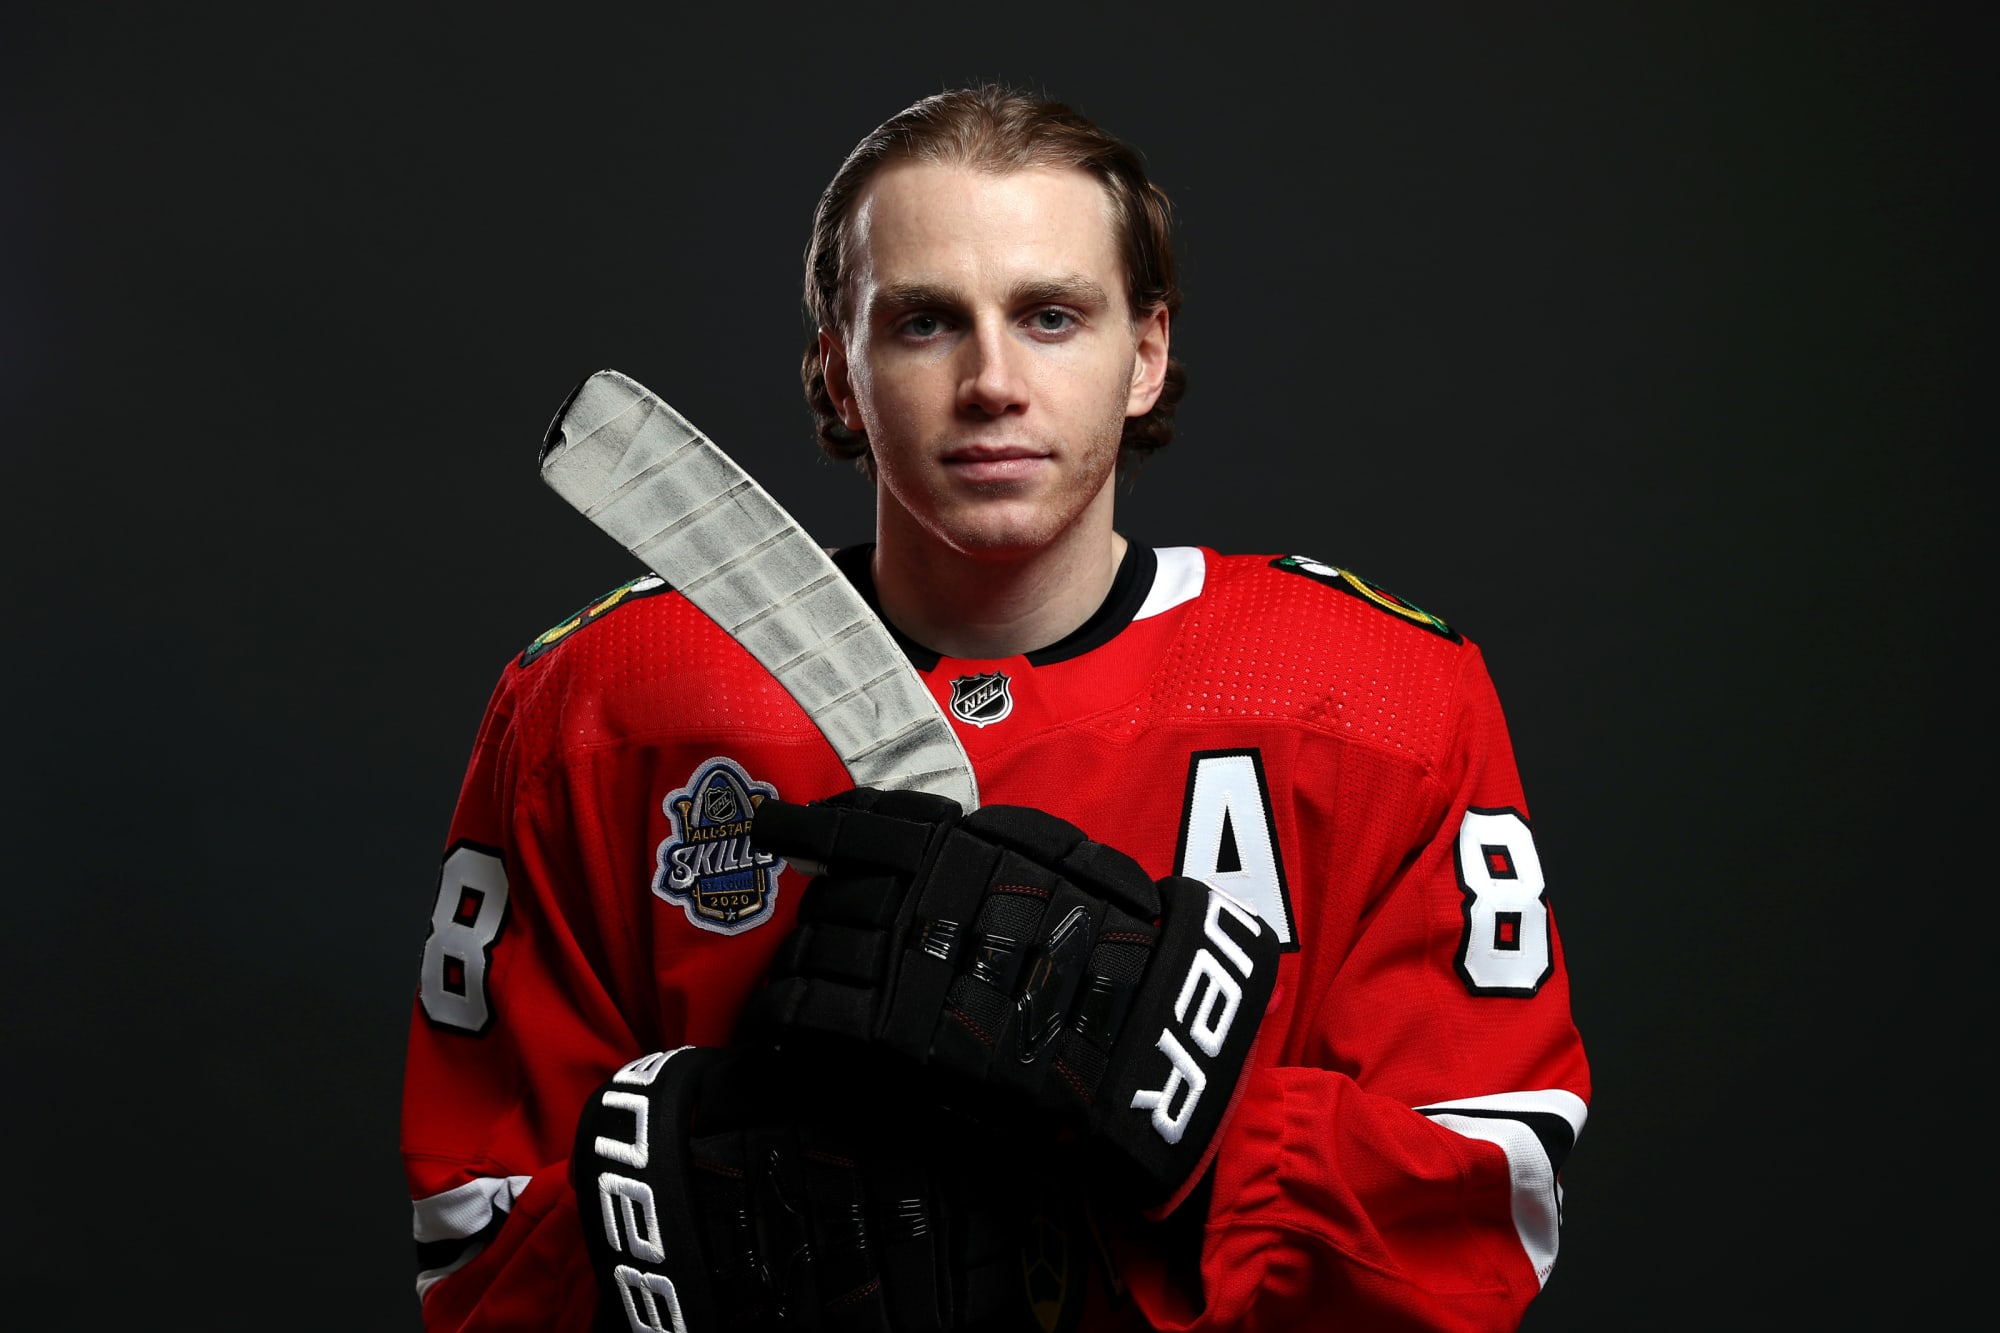 Could the Flyers acquire Patrick Kane from the Blackhawks?